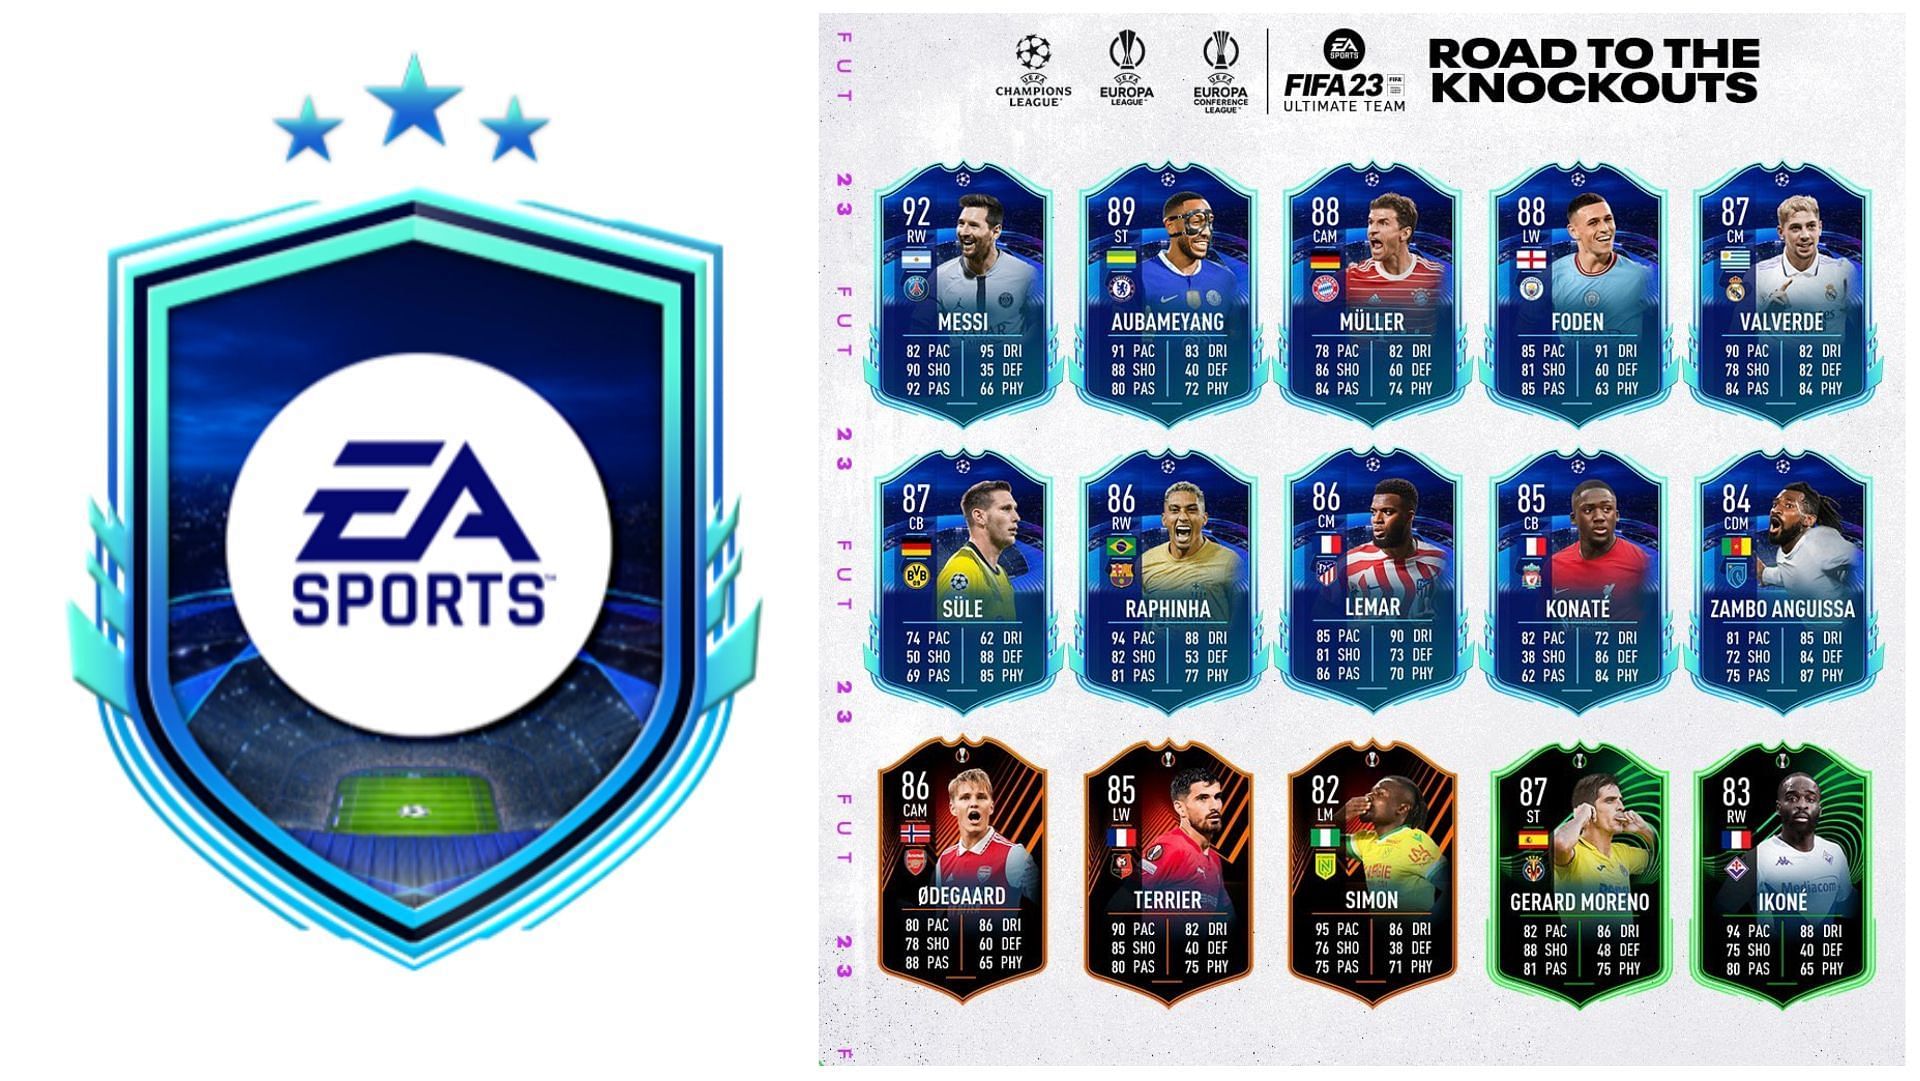 One for the Win SBC has been released in FIFA 23 (Images via EA Sports)